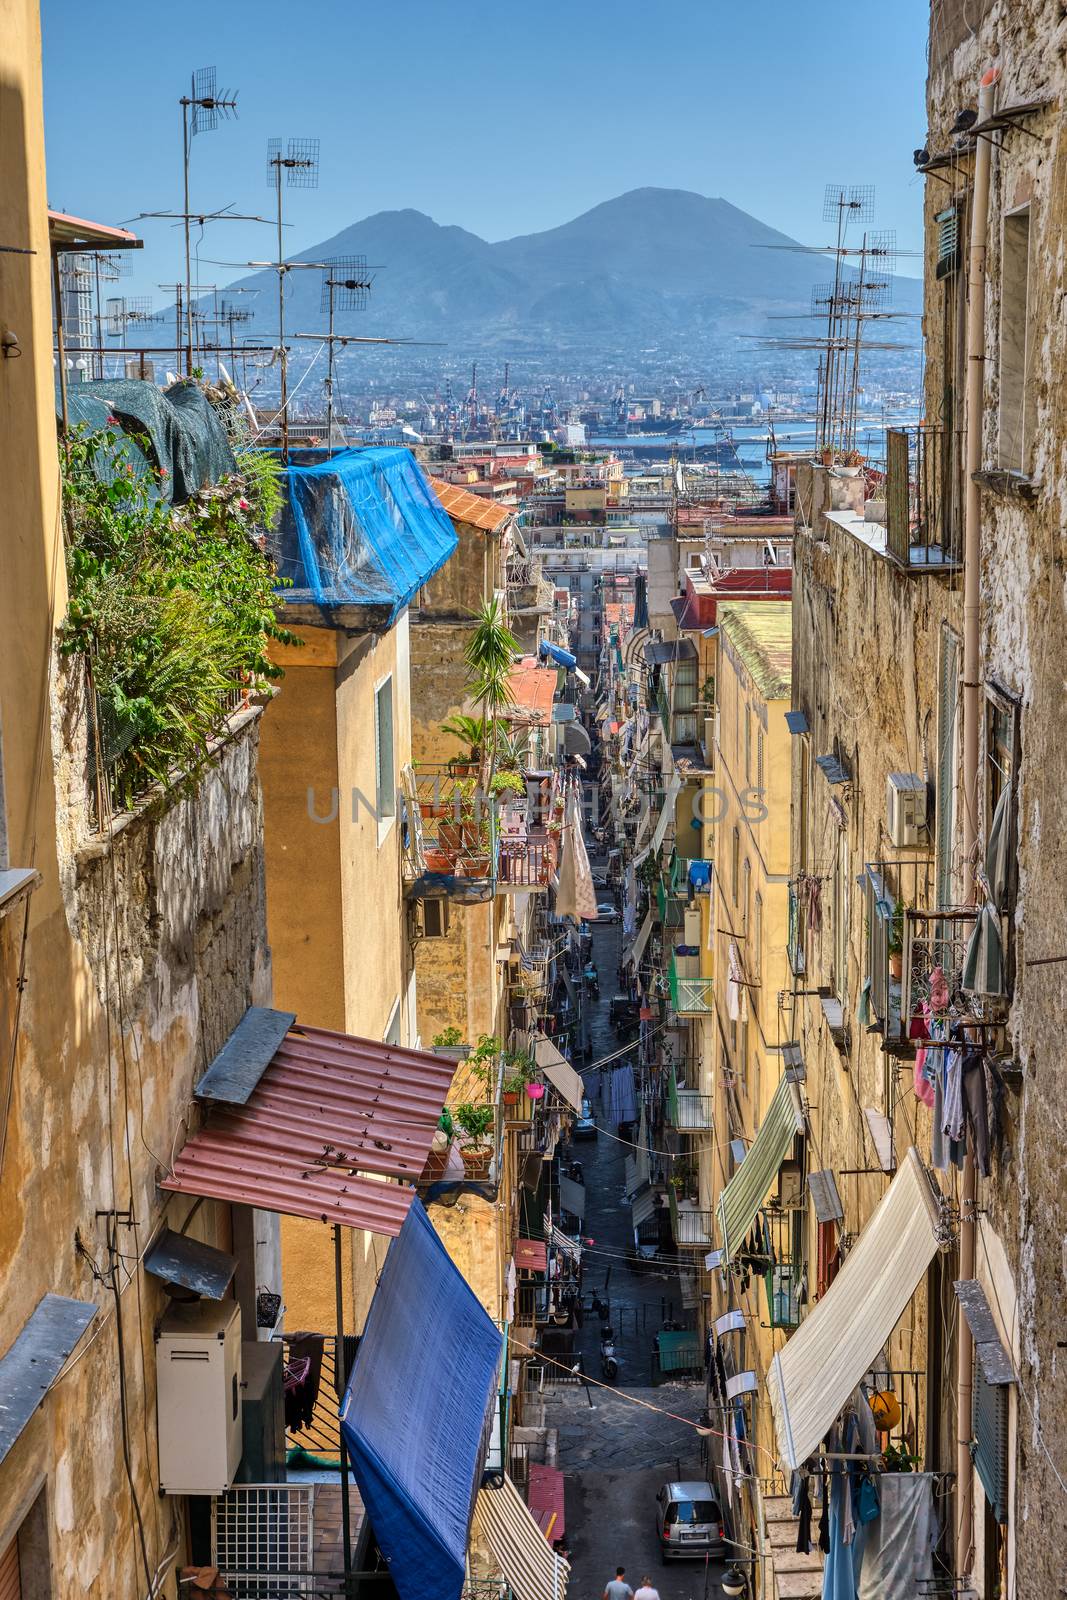 Narrow alleyway in the old town of Naples with Mount Vesuvius in the back